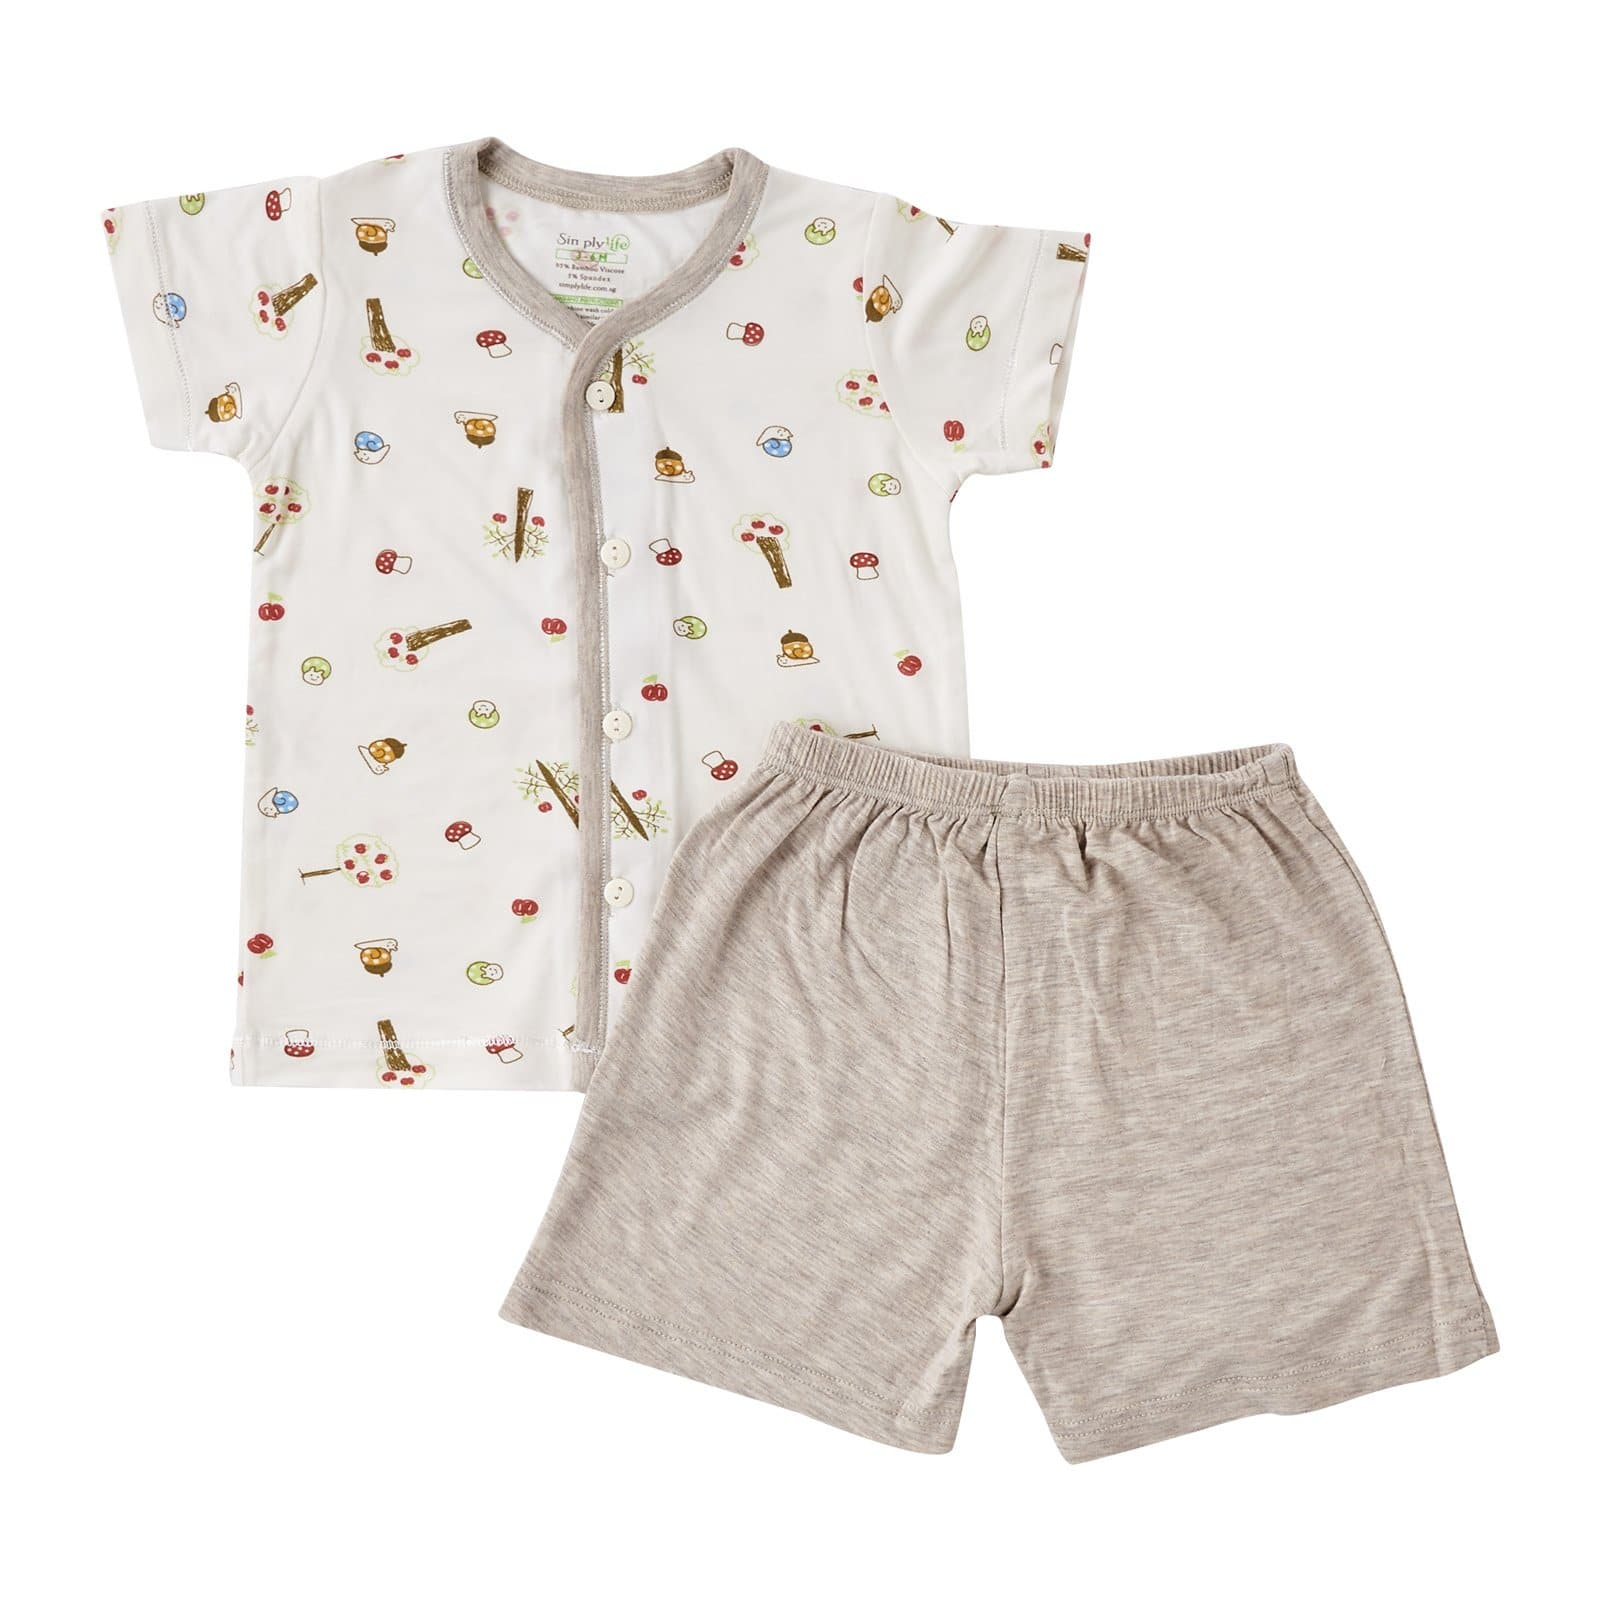 Apples - Short sleeved button vest with shorts (Khaki) - Simply Life